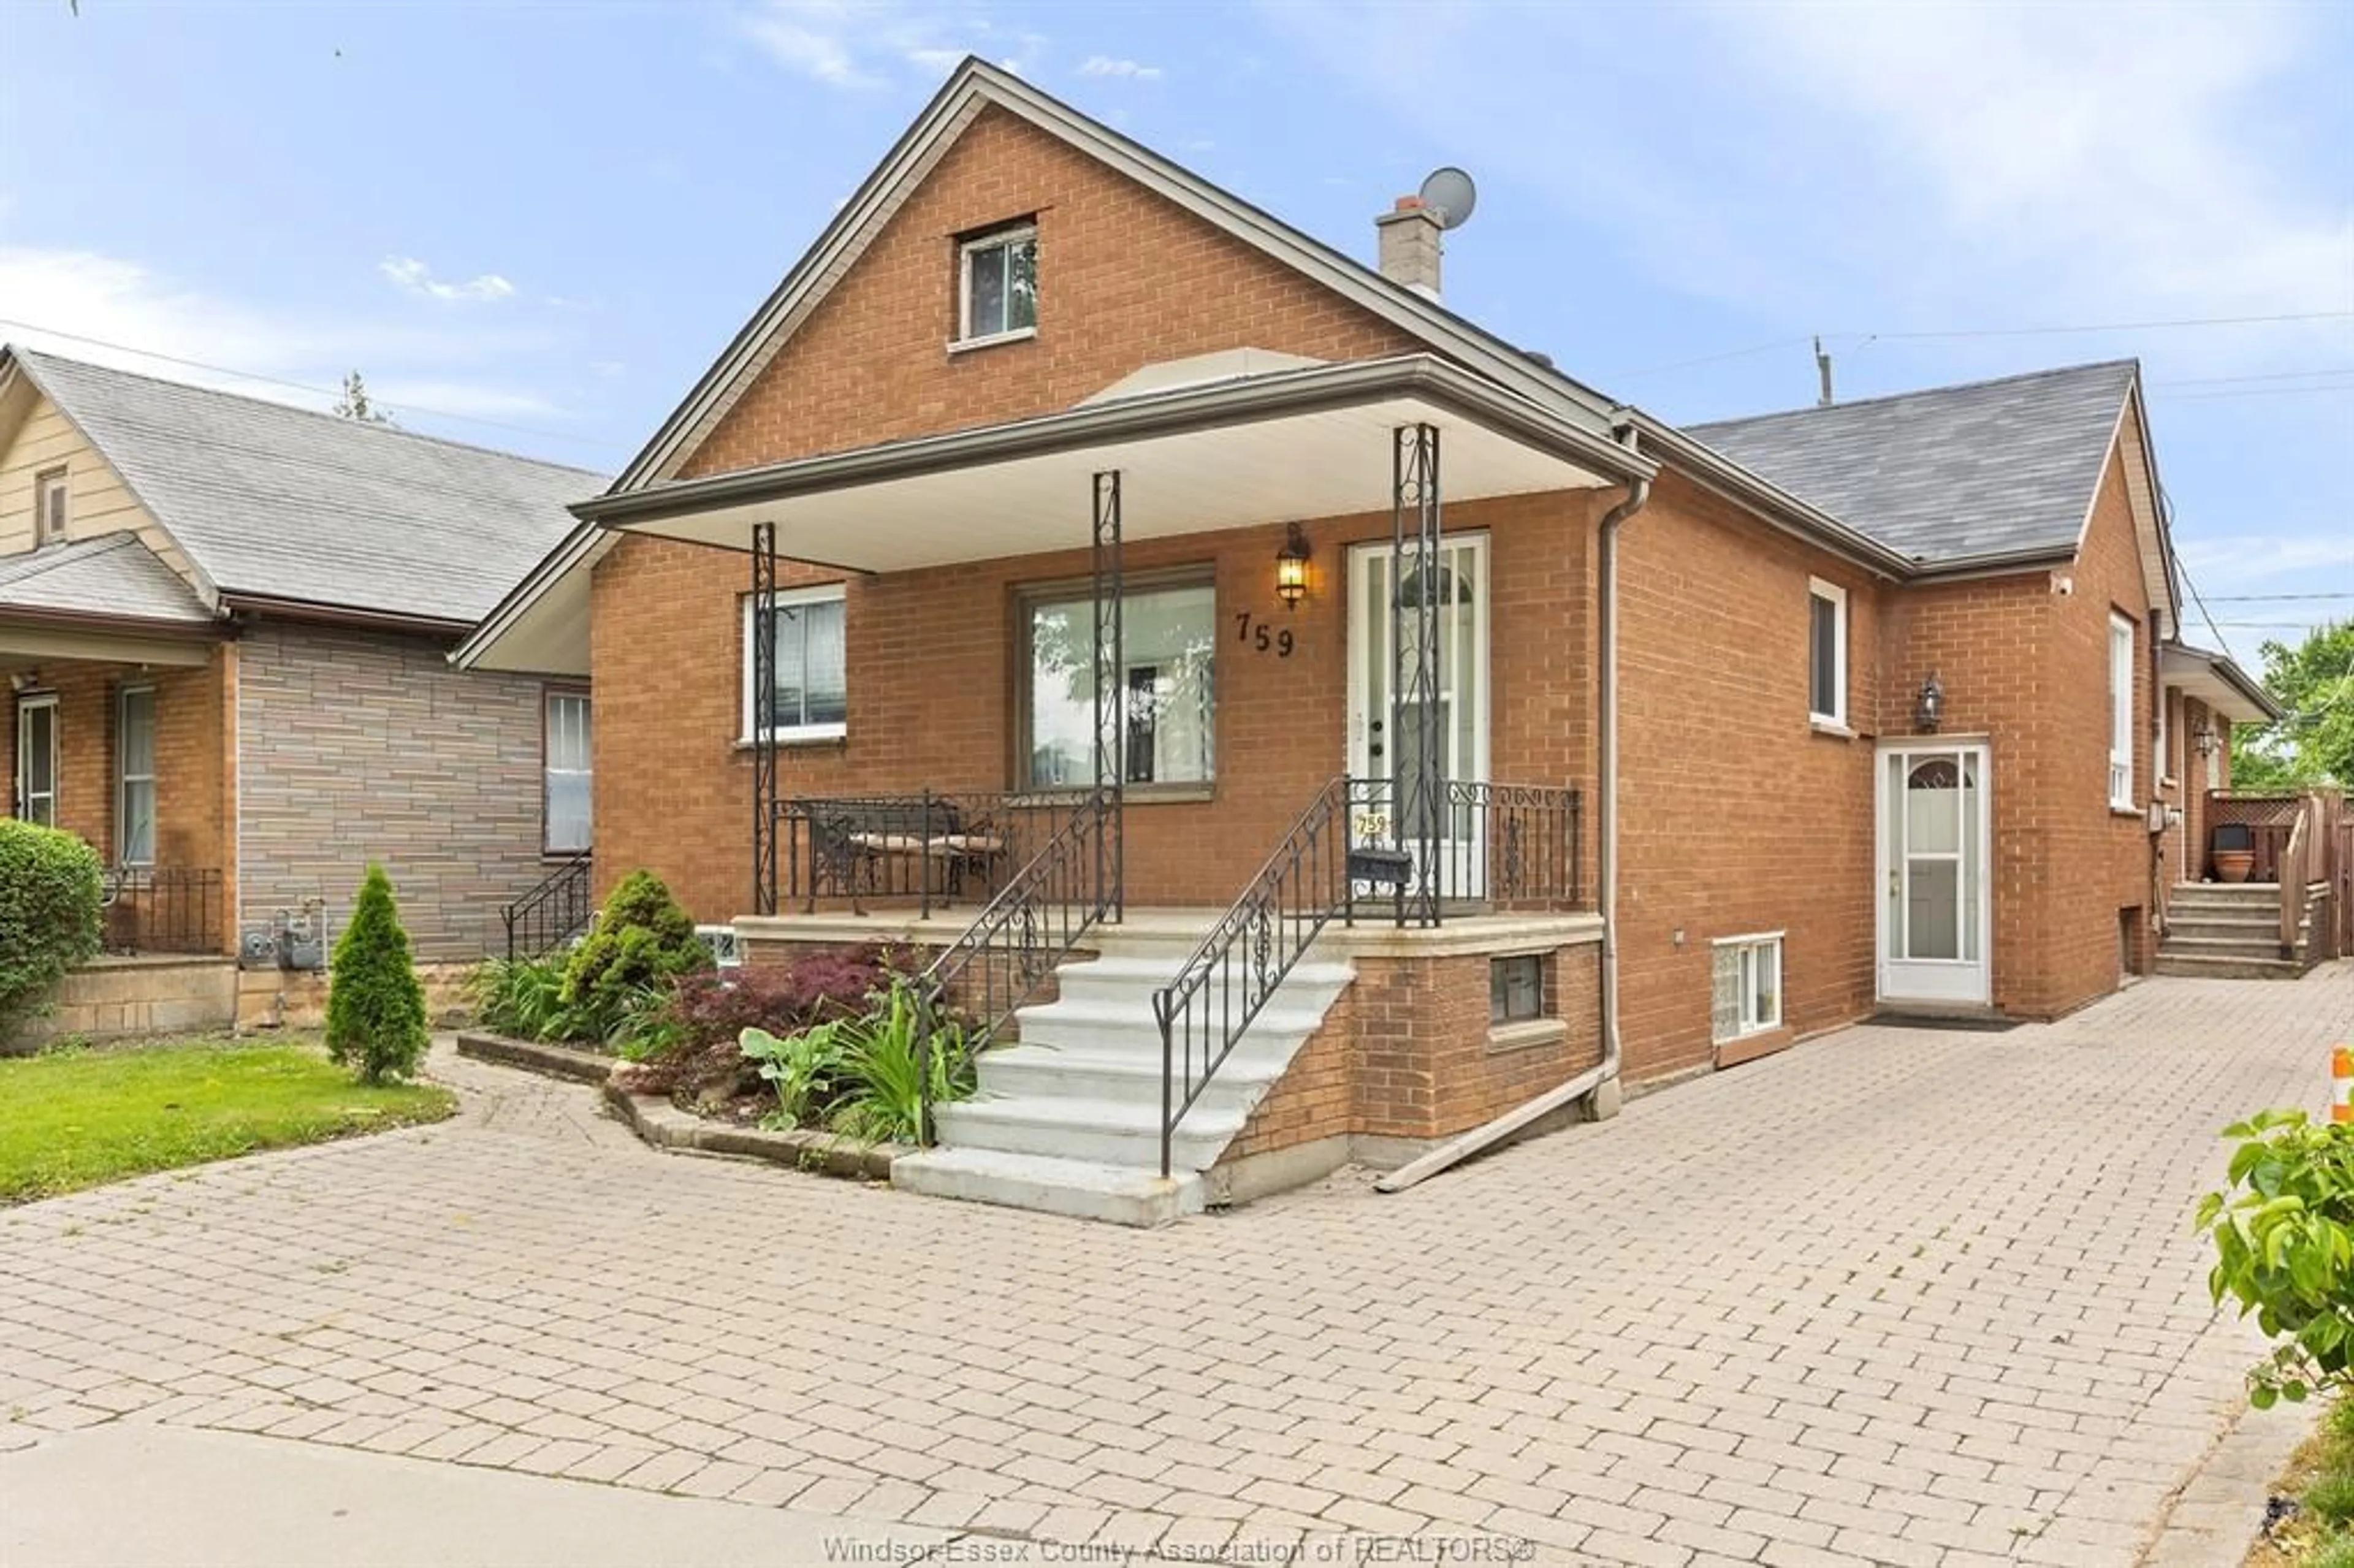 Home with brick exterior material for 759 GLENGARRY Ave, Windsor Ontario N9A 1R4